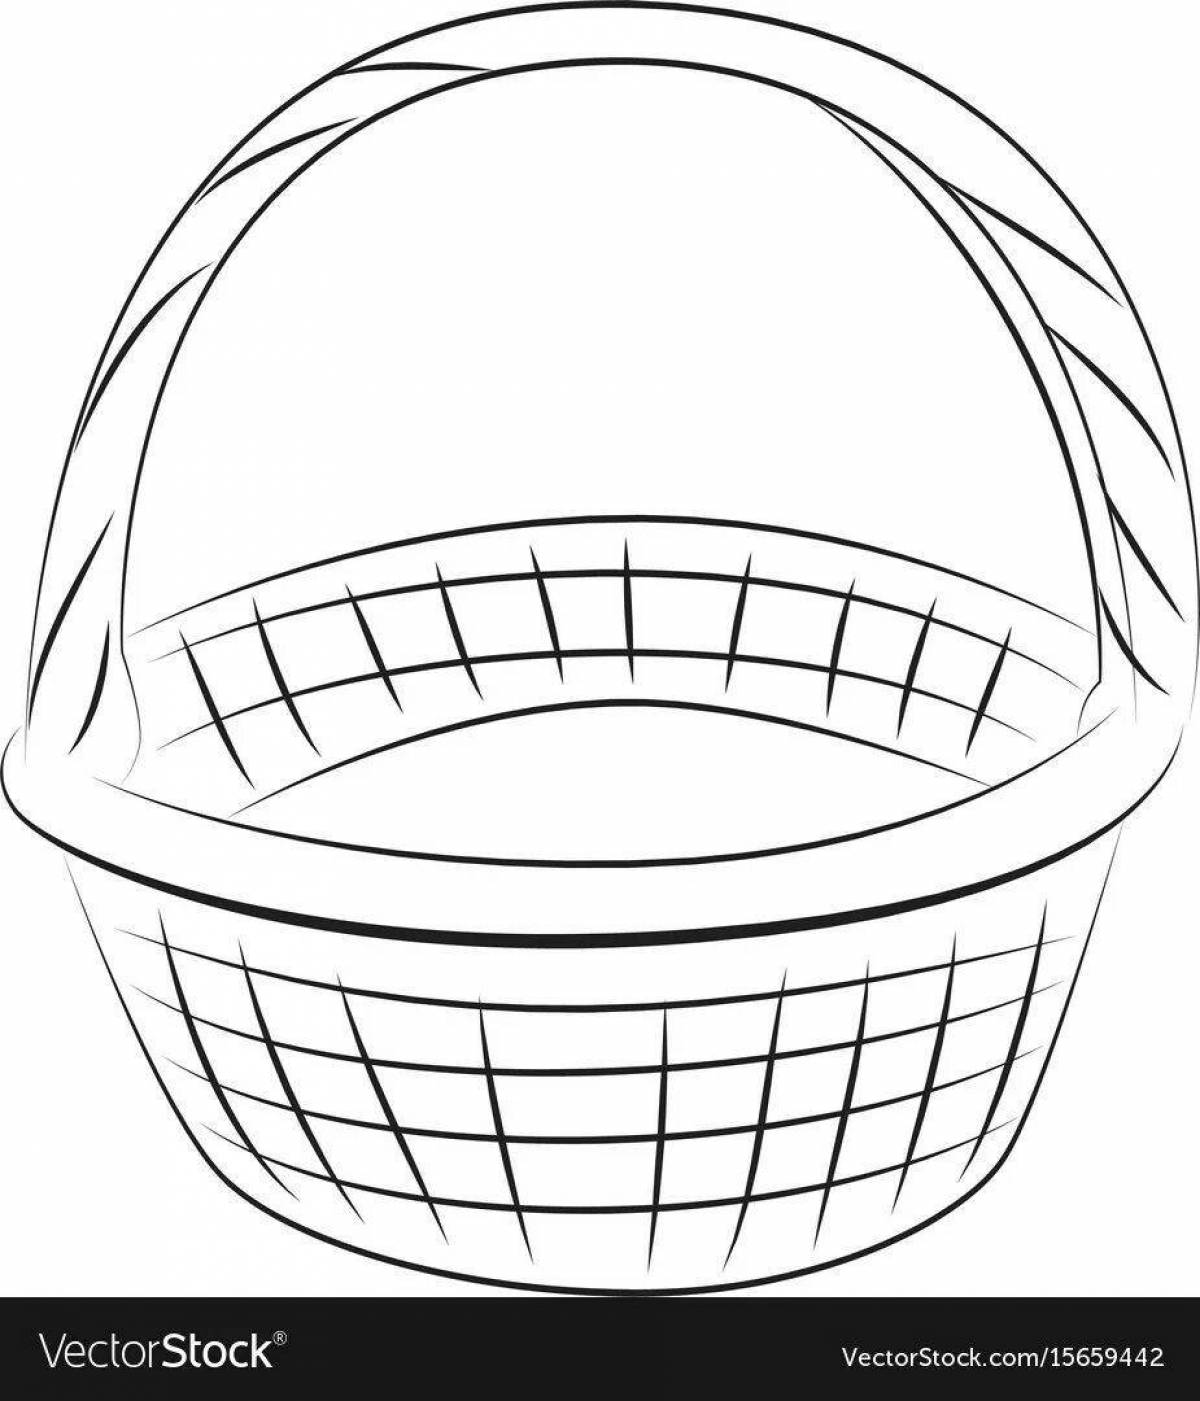 Glowing basket coloring page is empty